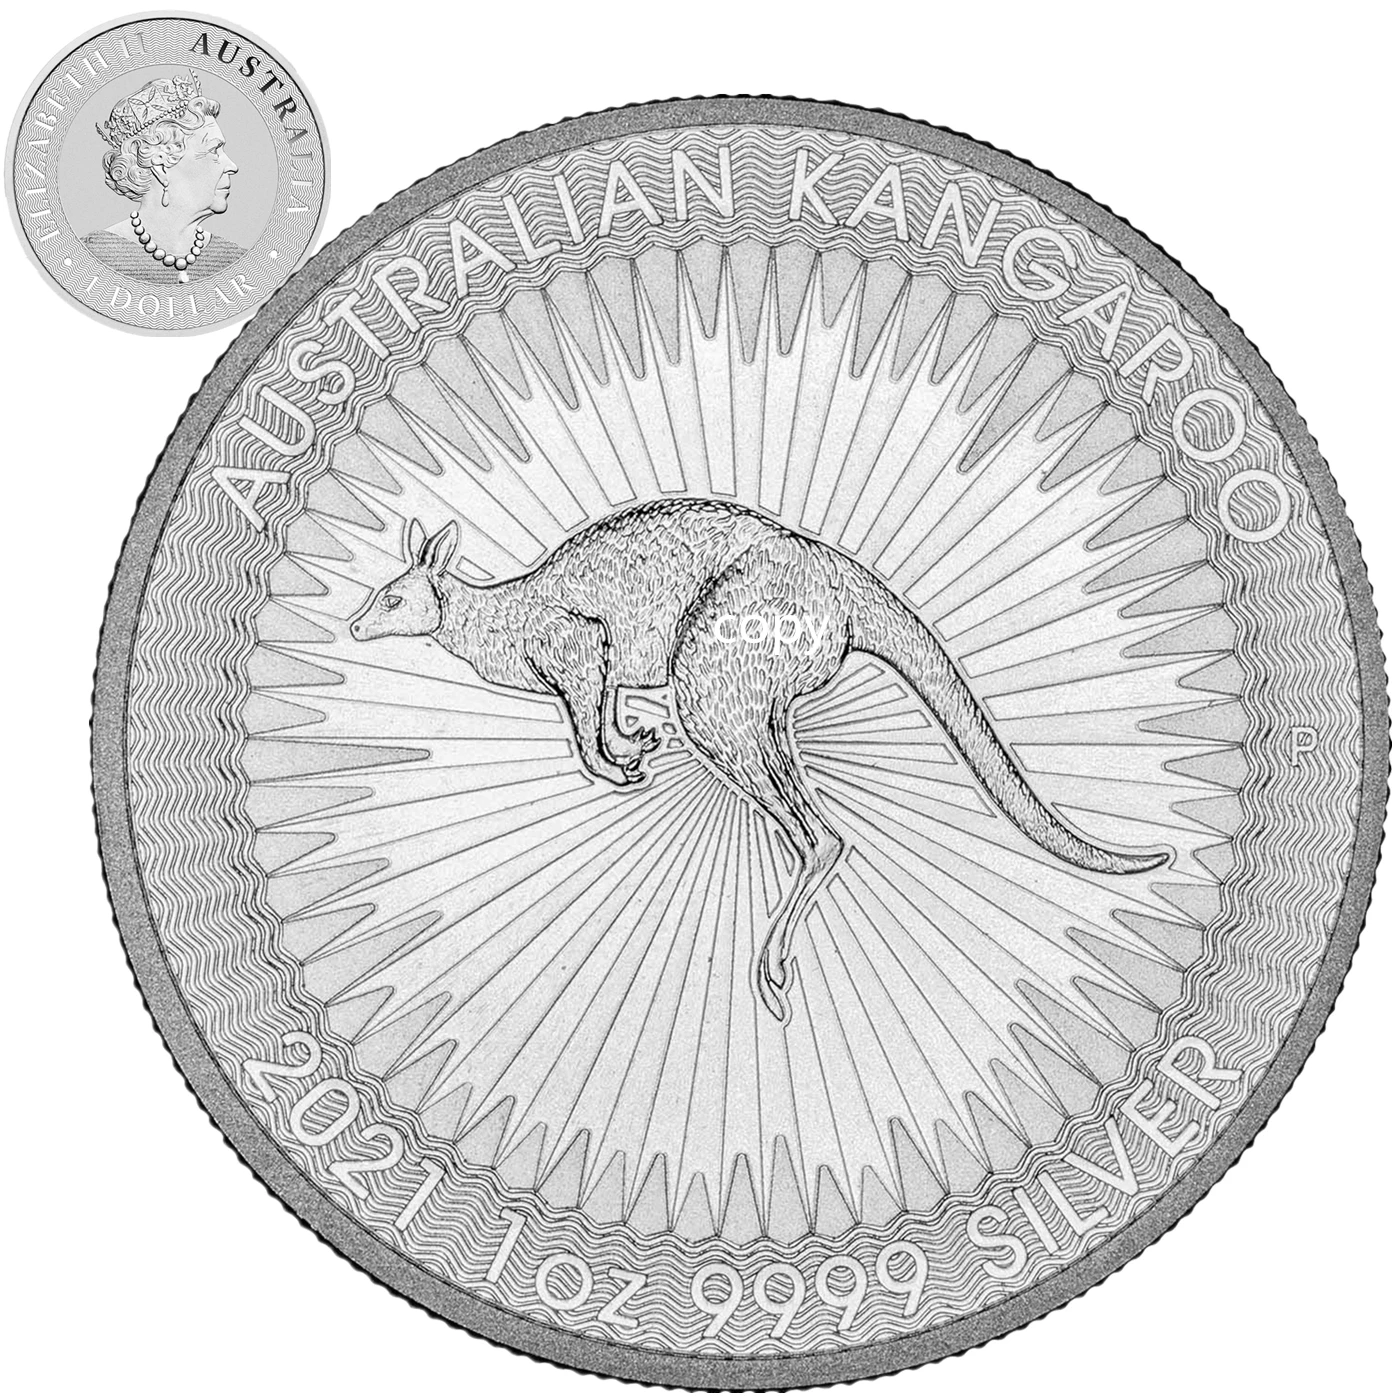 

2021 Australia Kangaroo Challenge Coin 1OZ Silver Plated Coin Elizabeth II Commemorative Coins Collectible Gifts